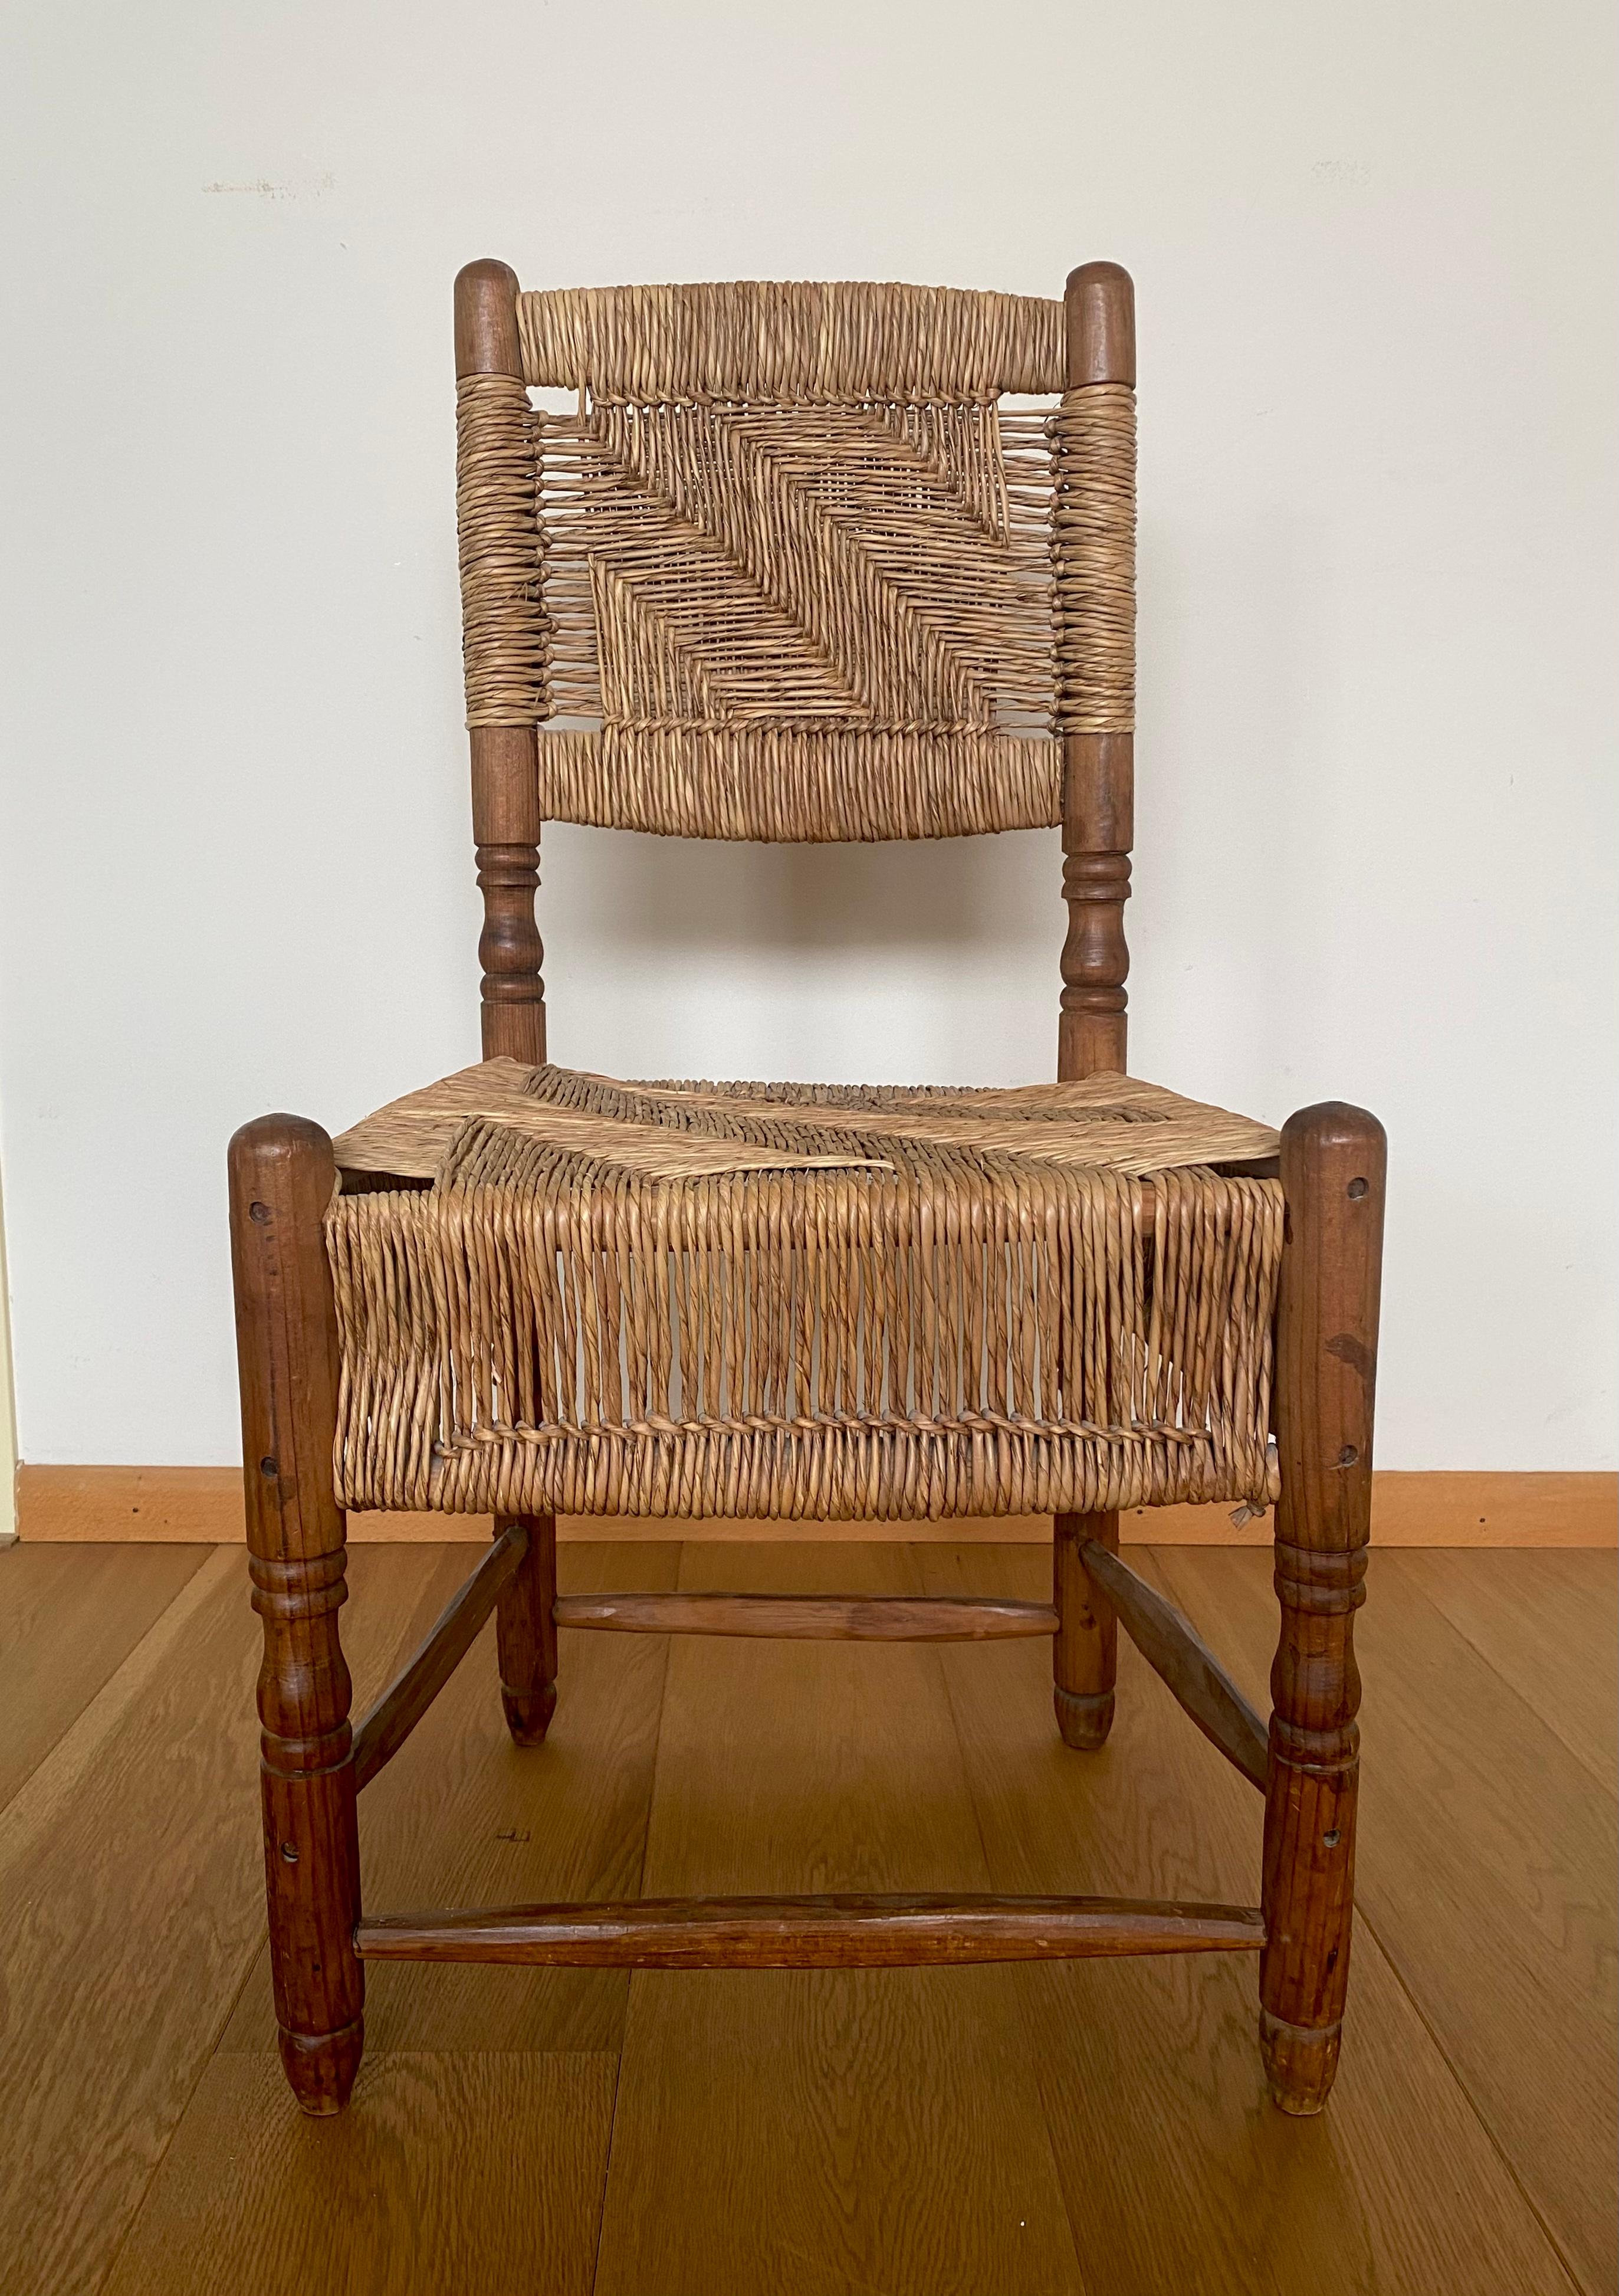 North American Rustic, Vintage, Wooden Chair with Woven Seat In Good Condition For Sale In Schagen, NL